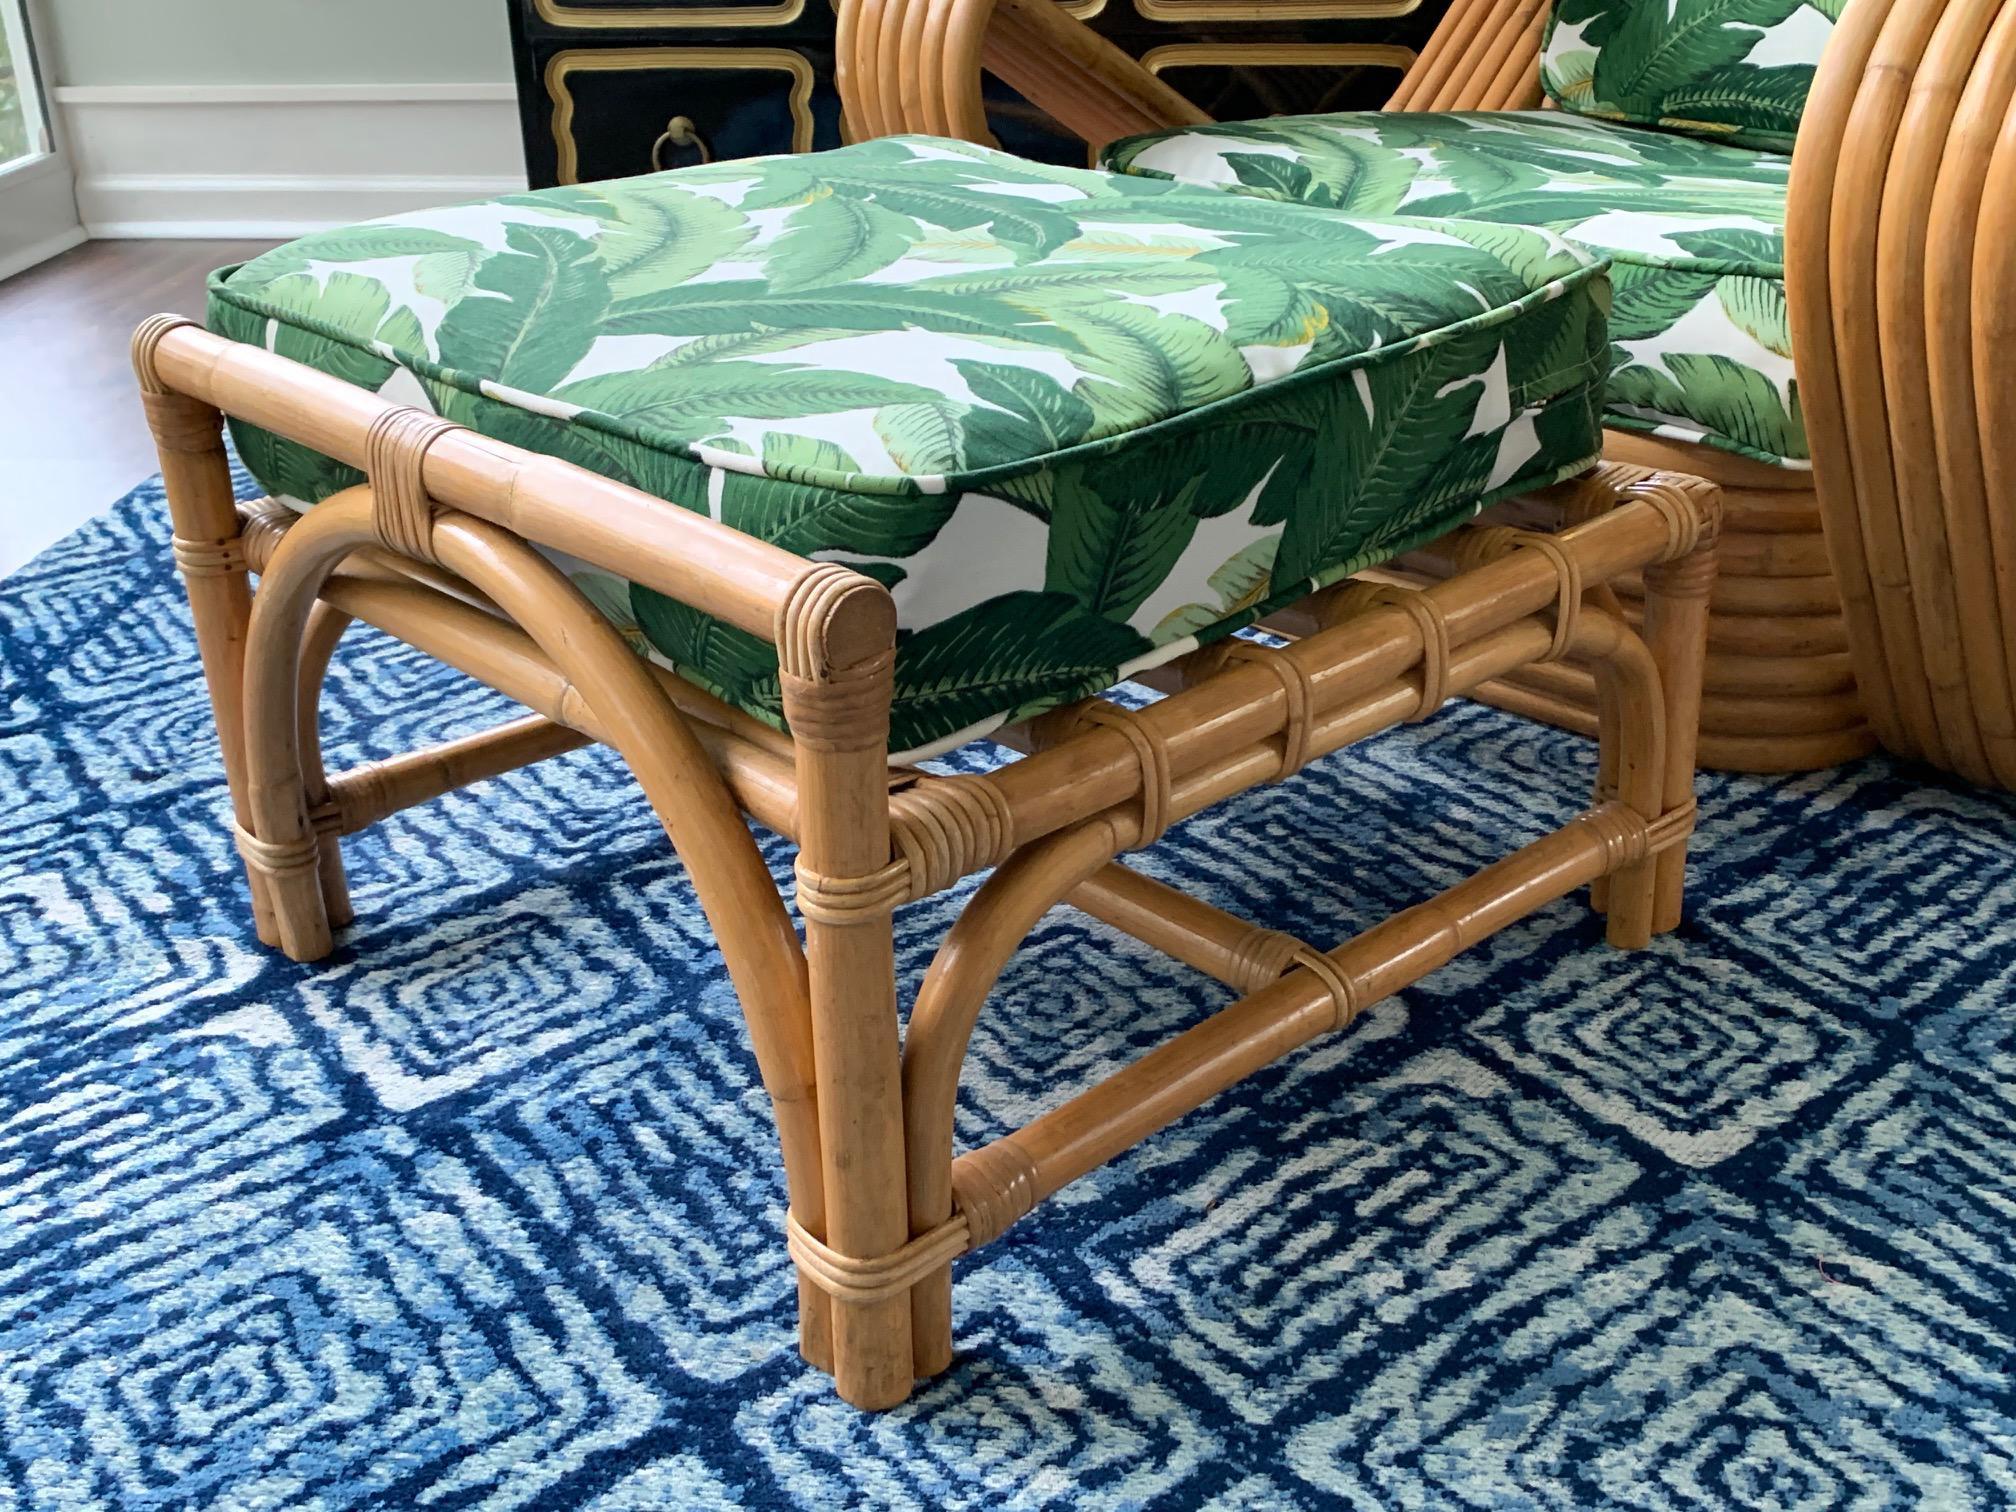 Vintage rattan pretzel lounge chair and ottoman in the manner of Paul Frankl features coveted six strand design and new palm leaf upholstery. Matching ottoman included. Very good condition with very minor imperfections consistent with gentle use.